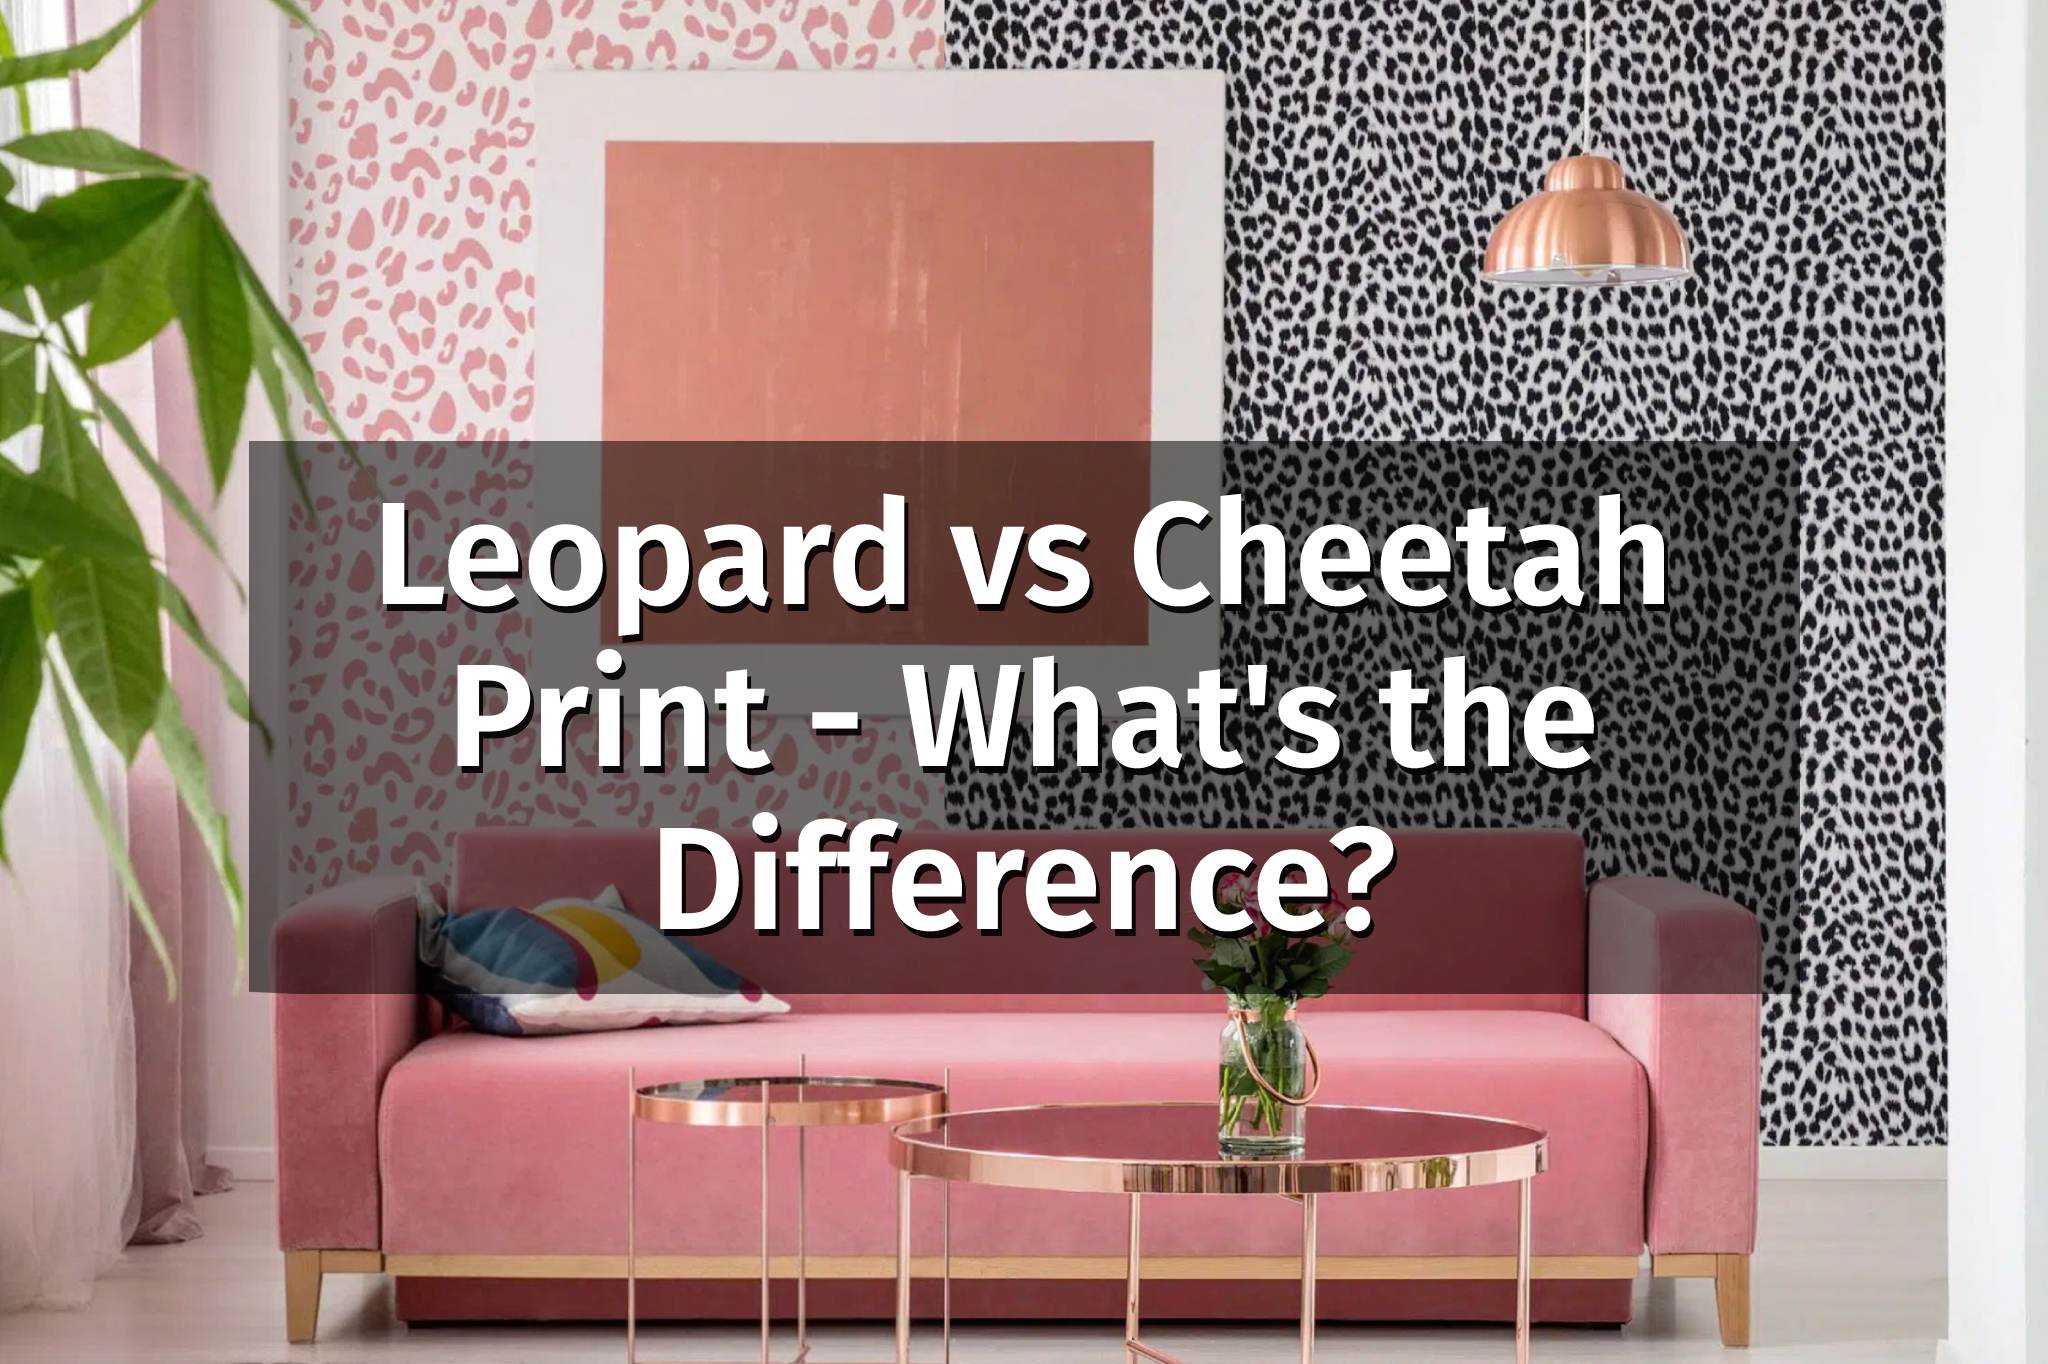 https://fancywalls.eu/wp-content/uploads/Leopard_vs_cheetah_print_what_the_difference.jpg